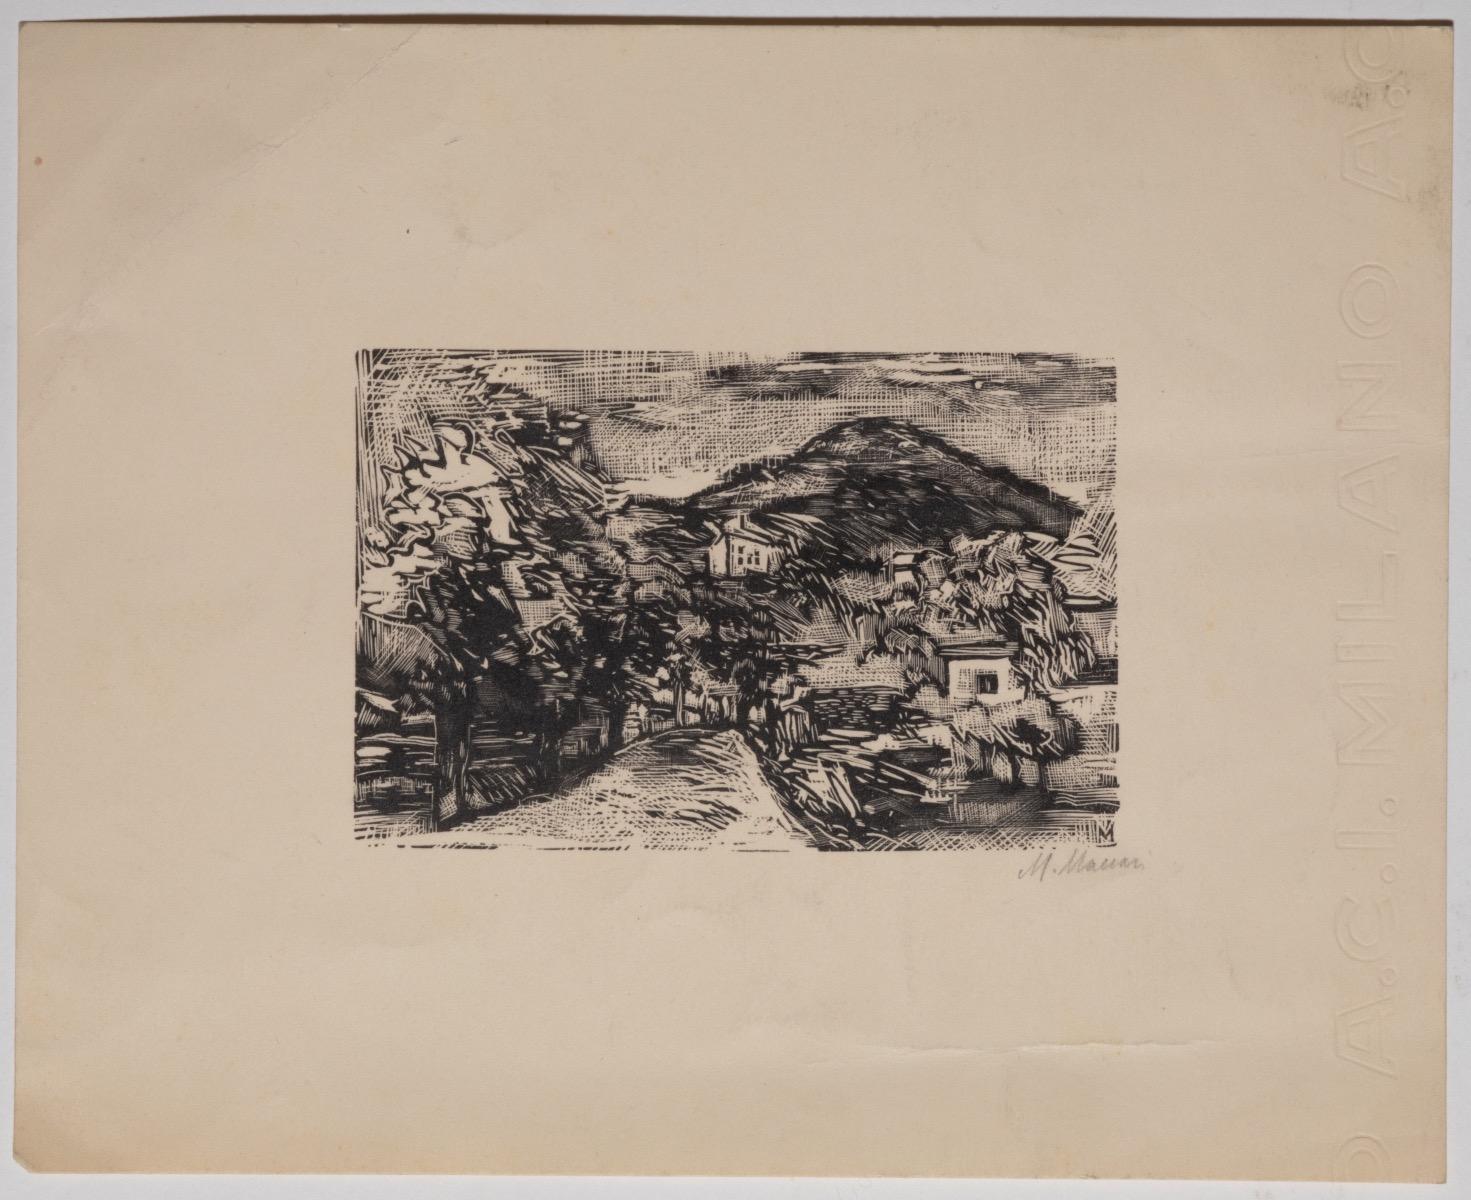 Landscape - Woodcut Print on Paper by Mino Maccari - Early 20th Century